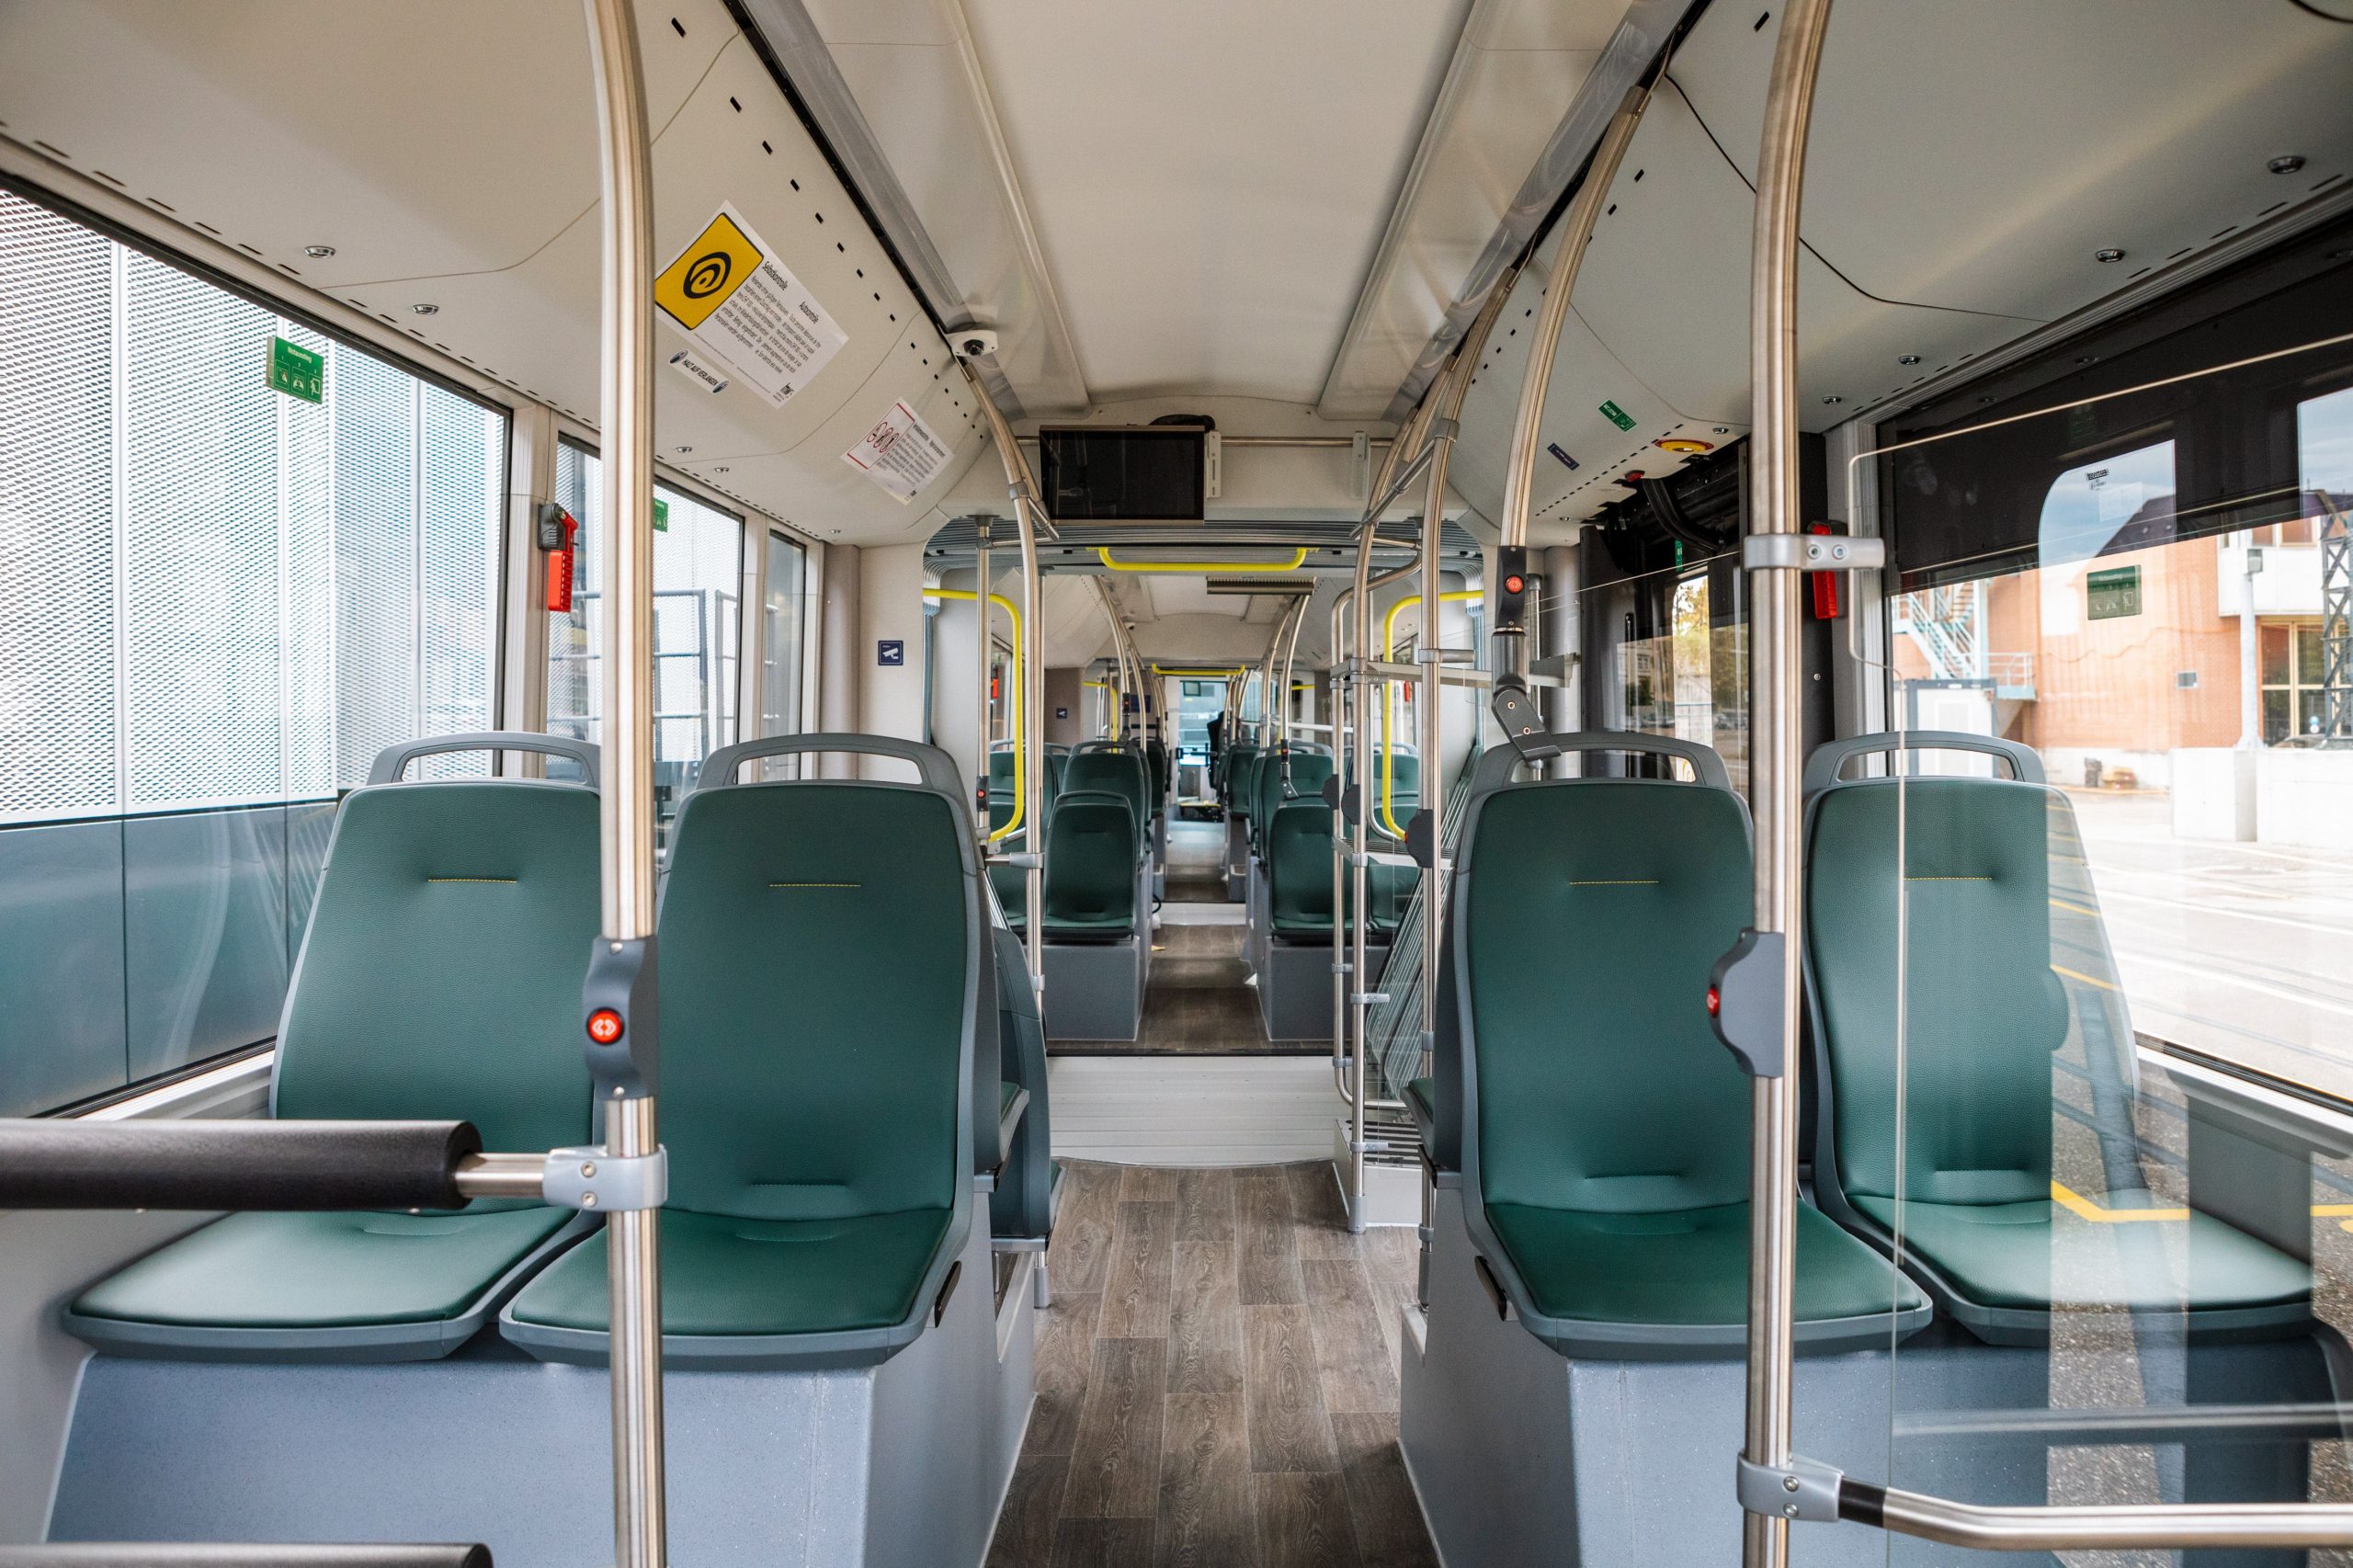 Electric double-articulated bus lighTram (HESS), inside view